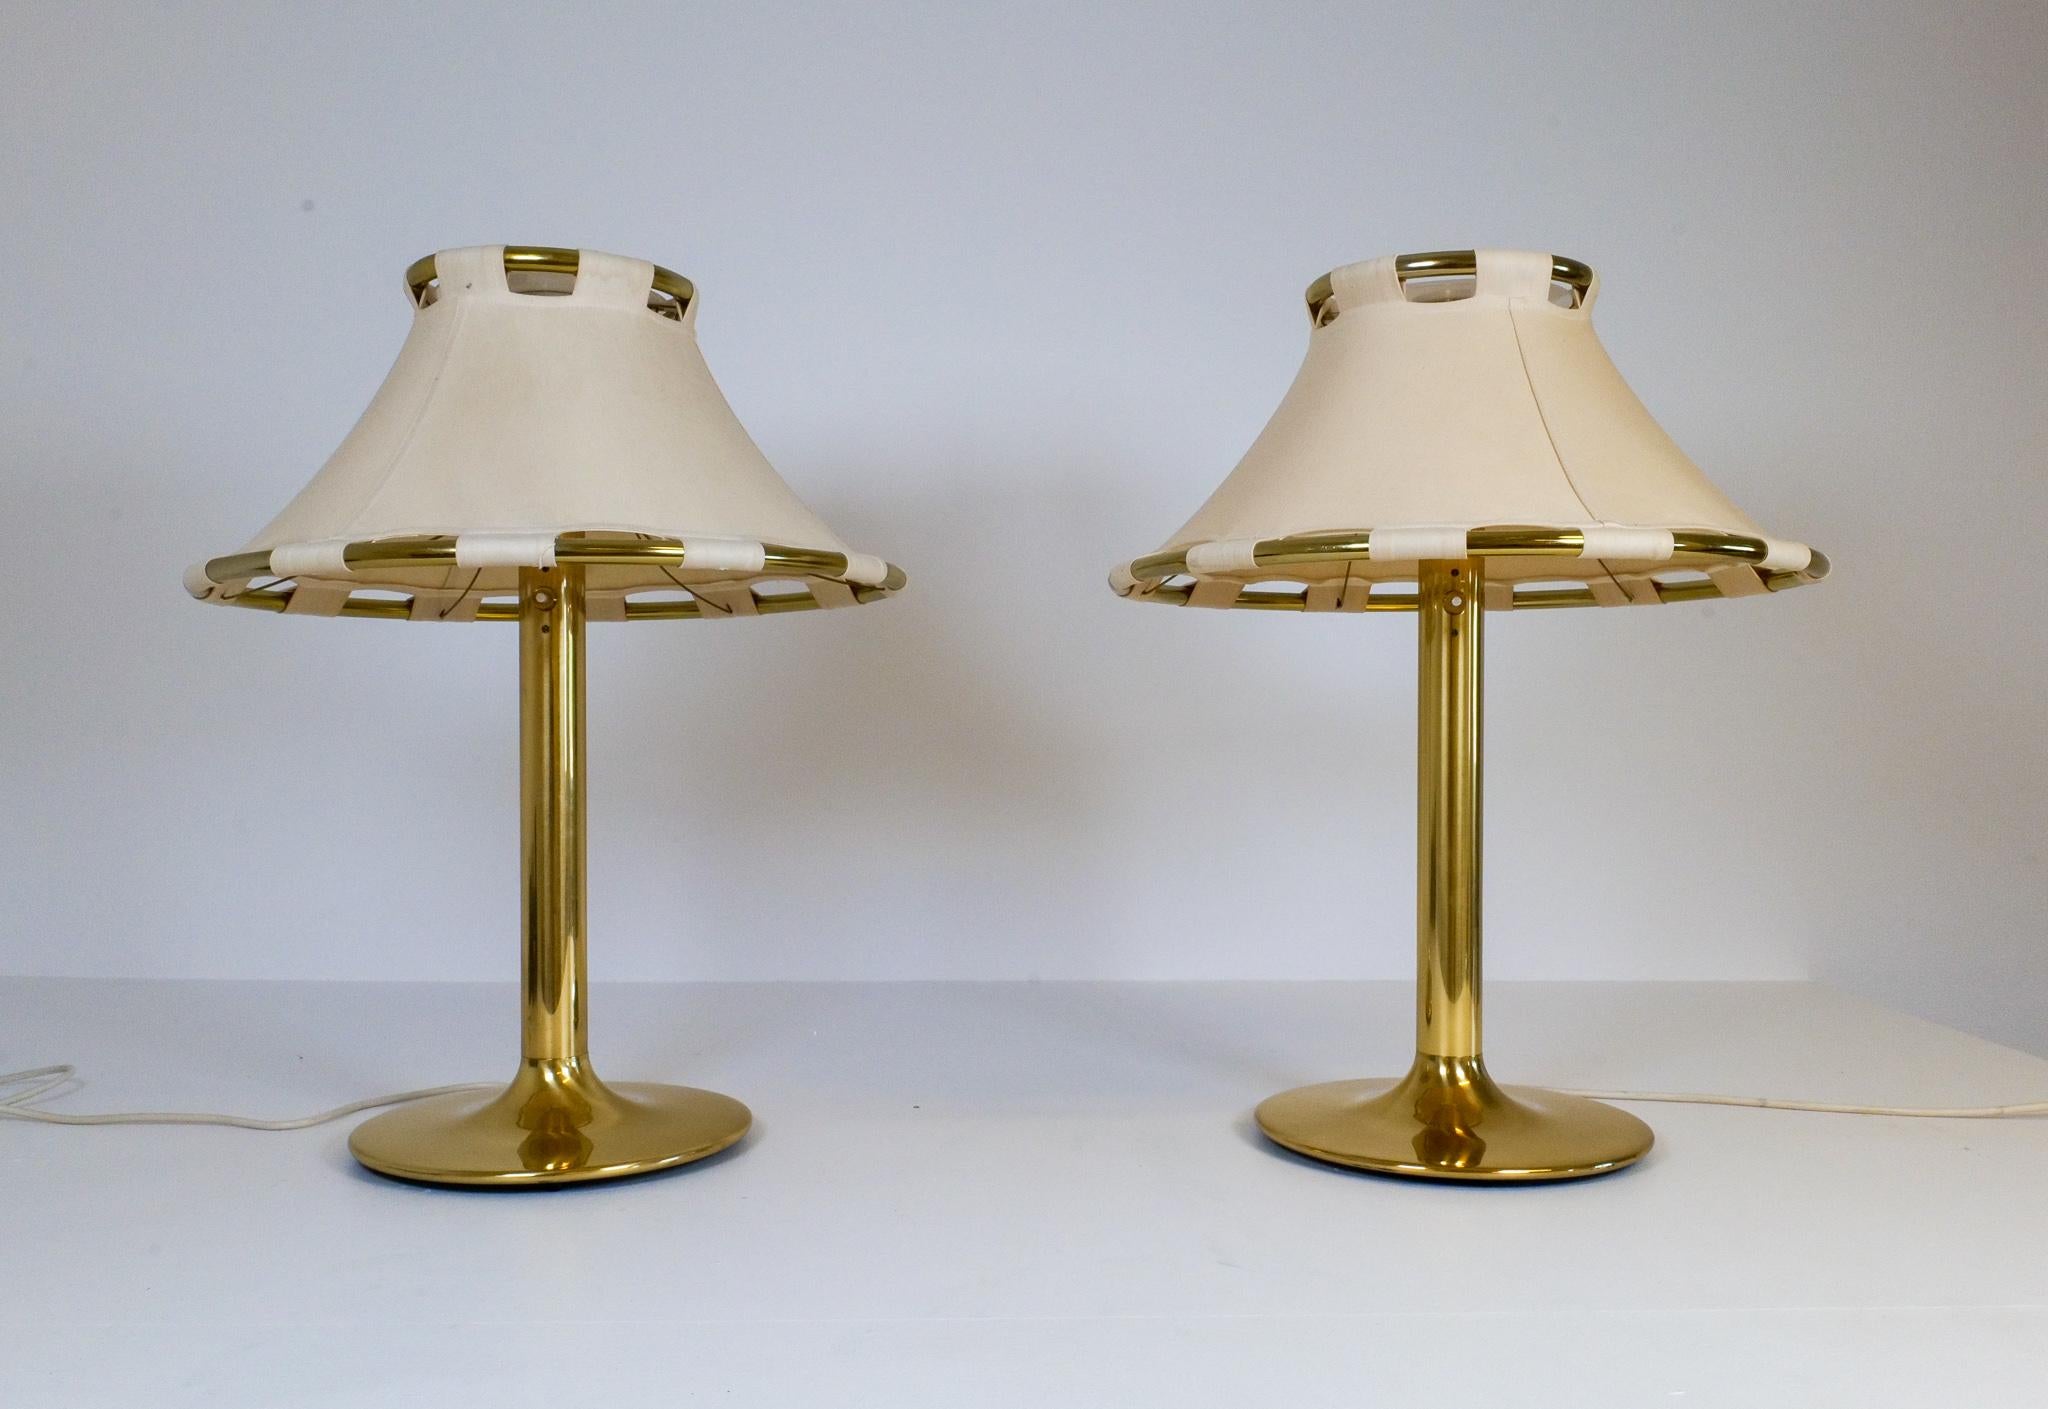 These 1970s table lamps, model 